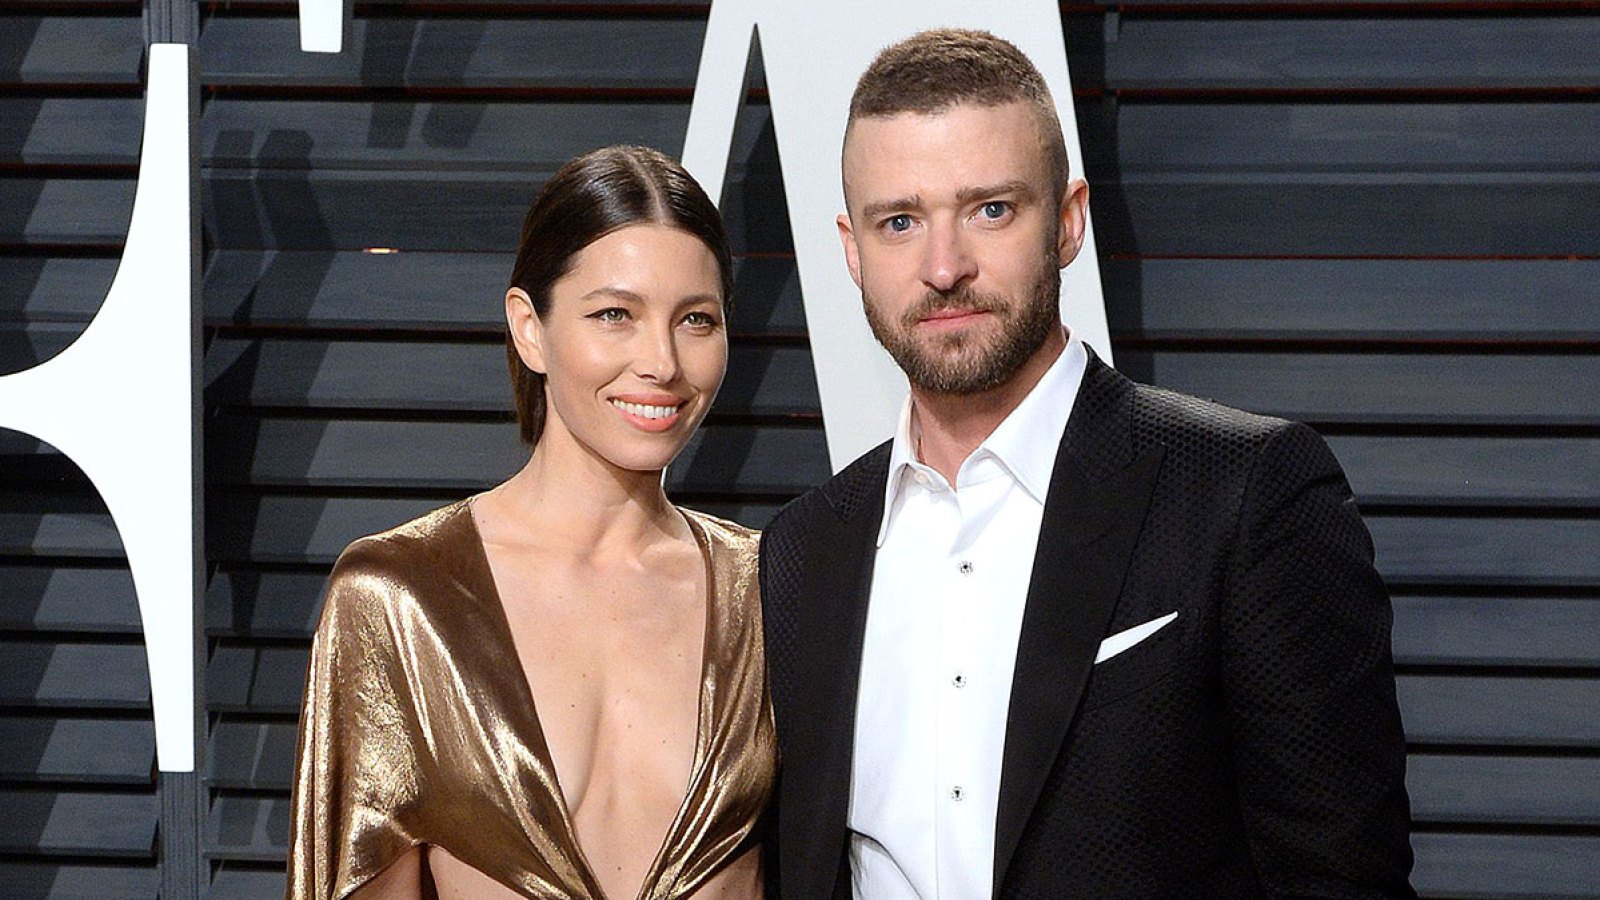 Jessica Biel Is 'Proud' of Justin Timberlake Marriage 2